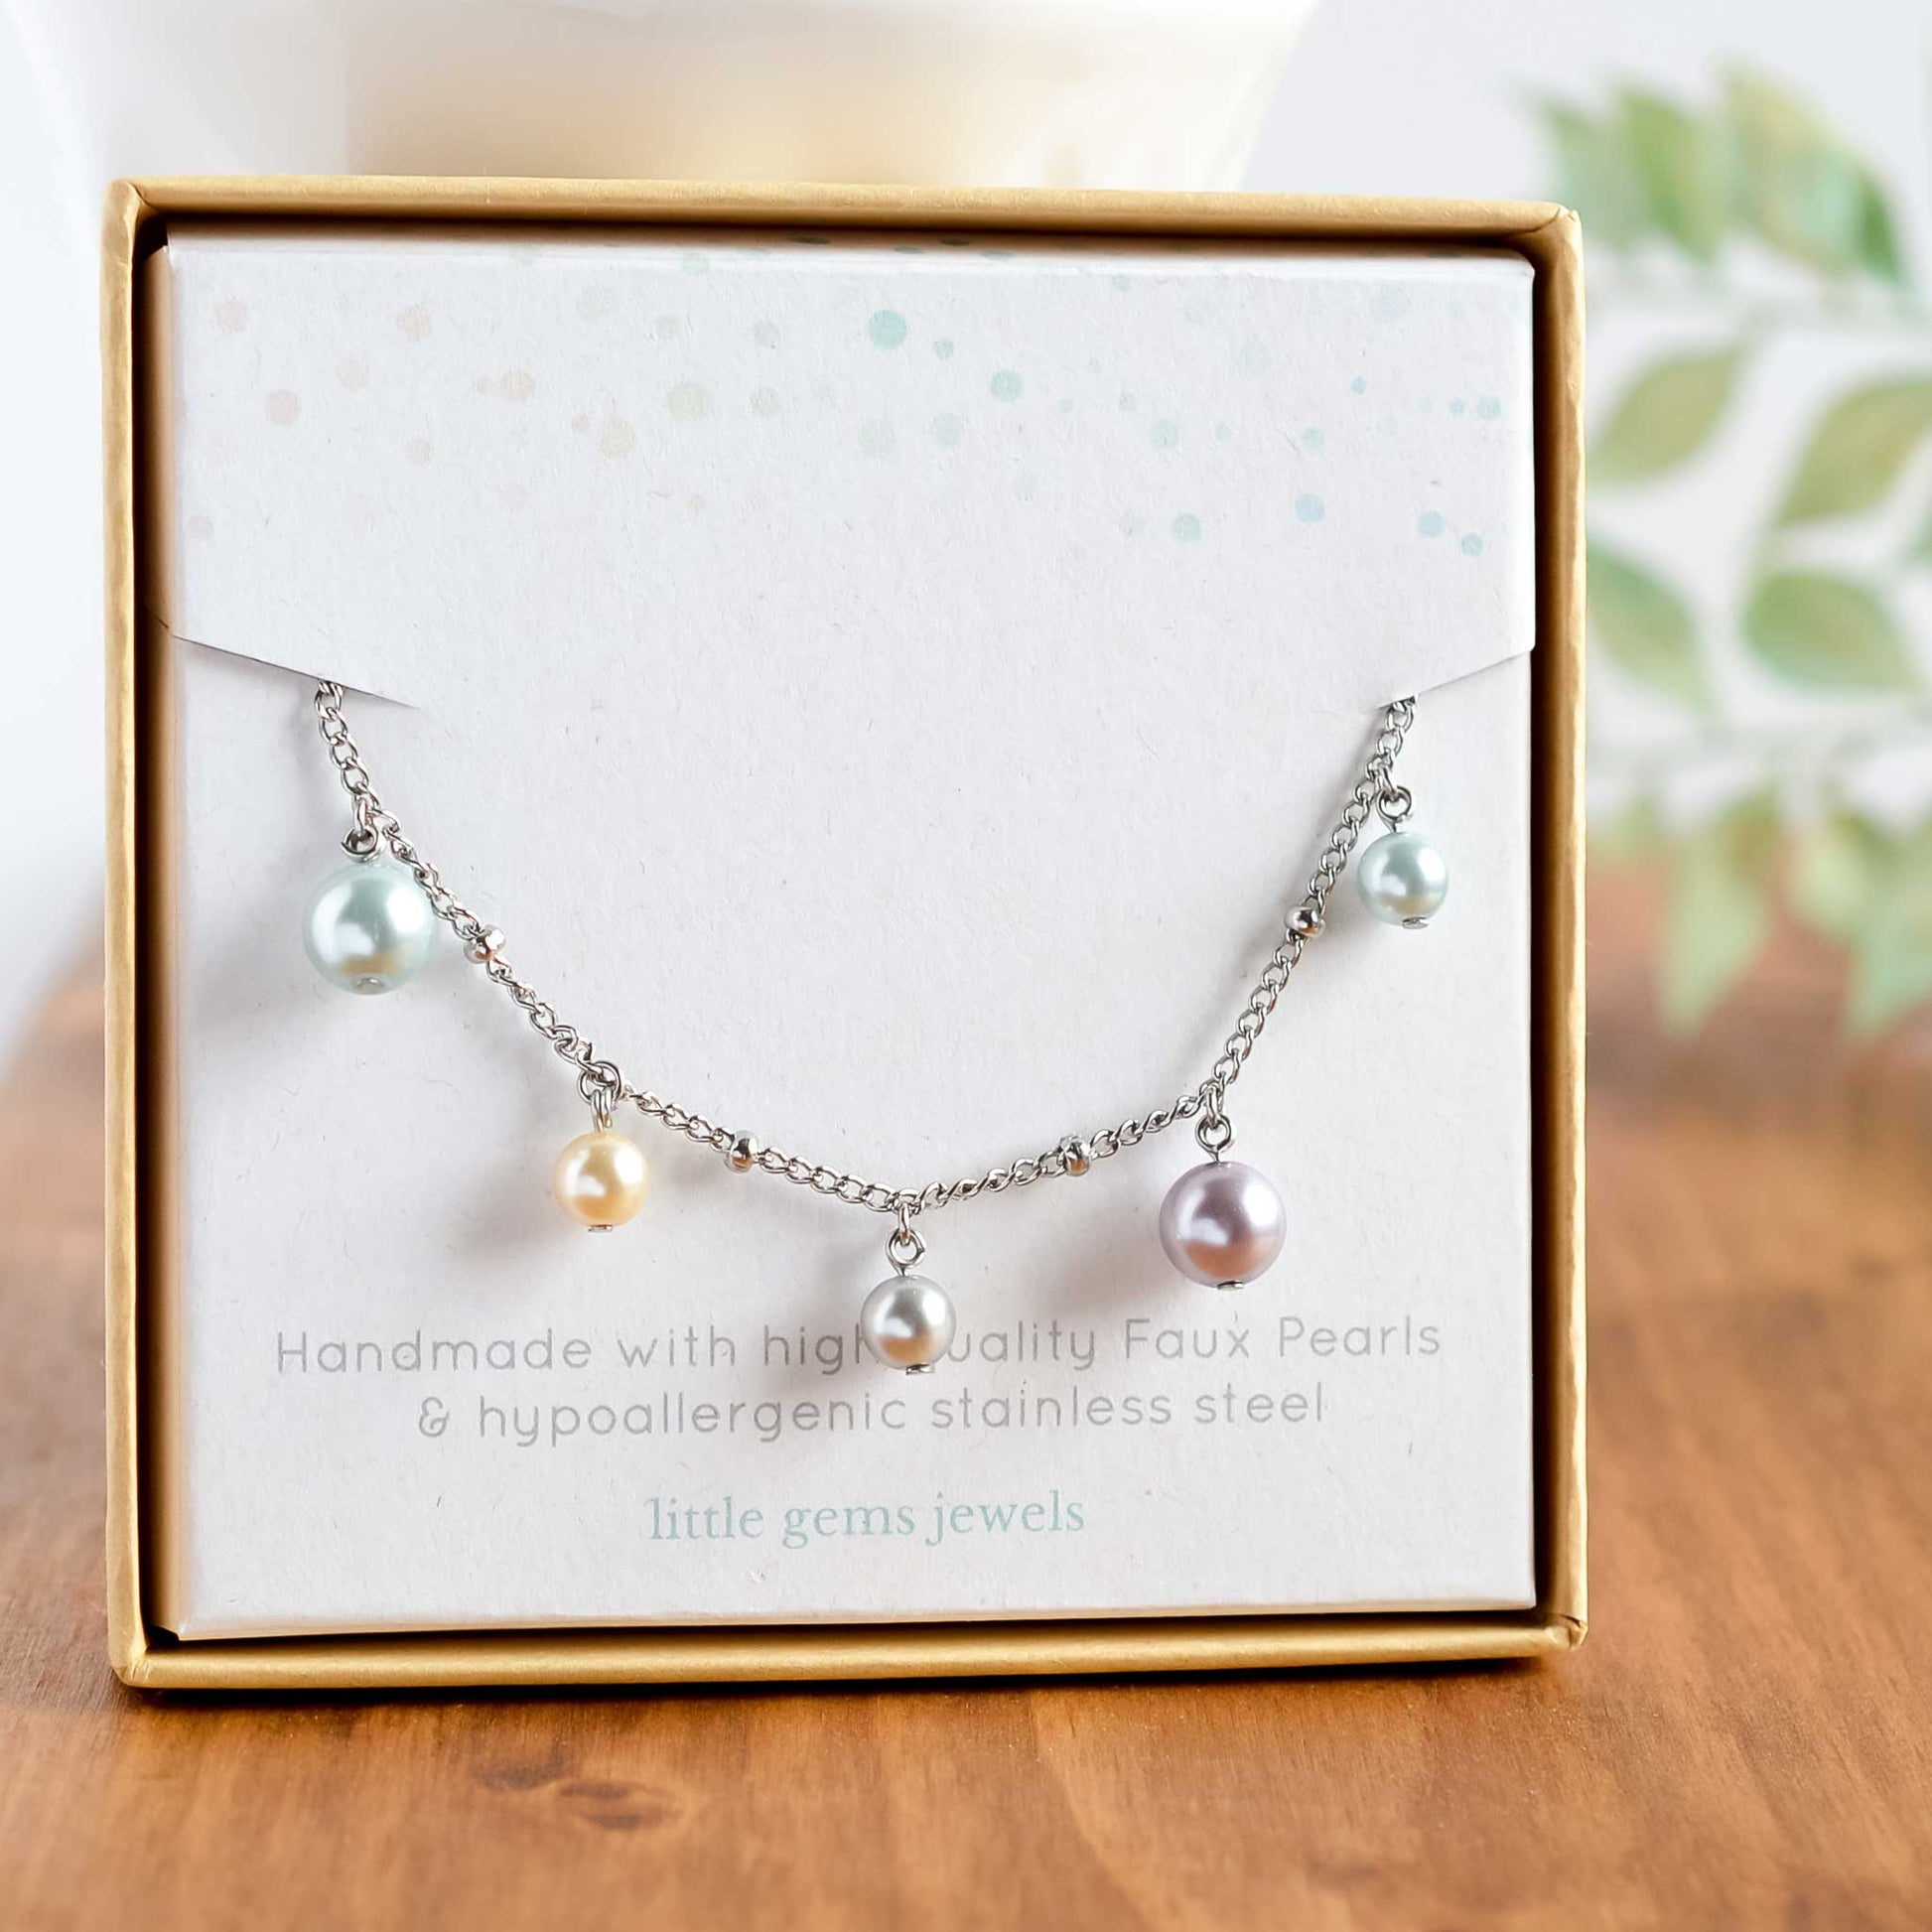 Faux pearl charms necklace in eco friendly gift box